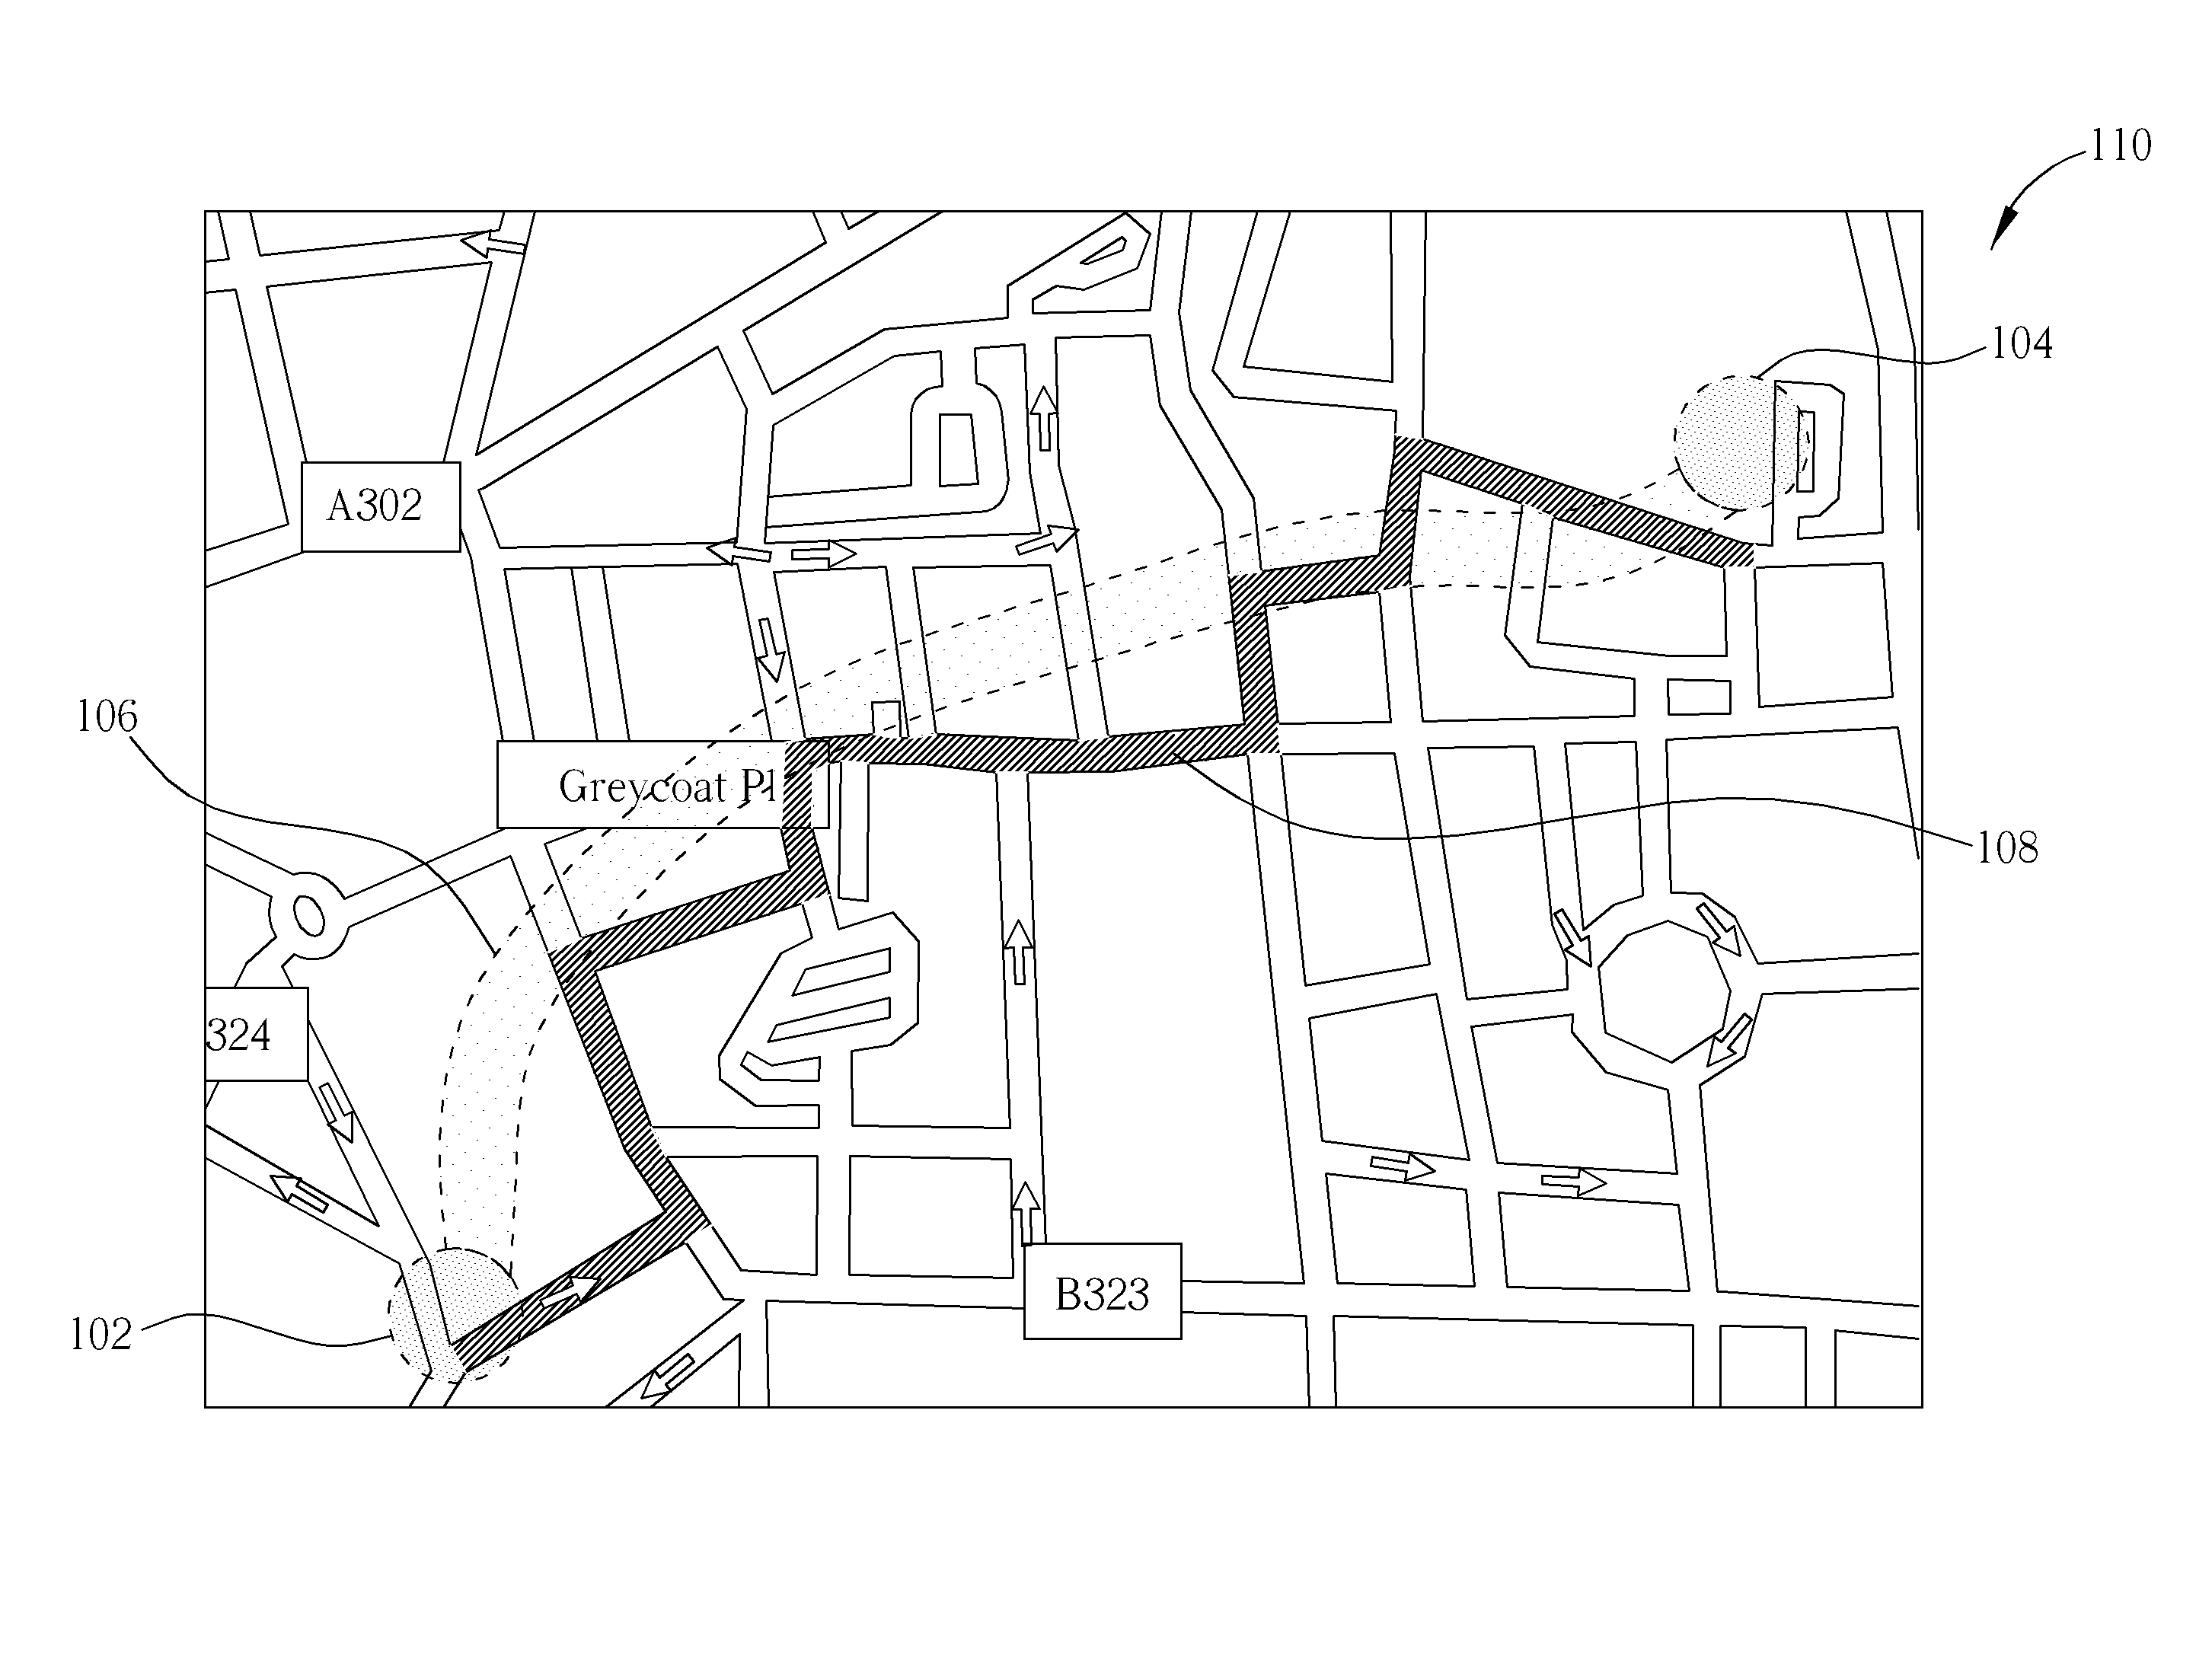 Method of generating a suggested navigation route based on touch input received from a user and related portable electronic device